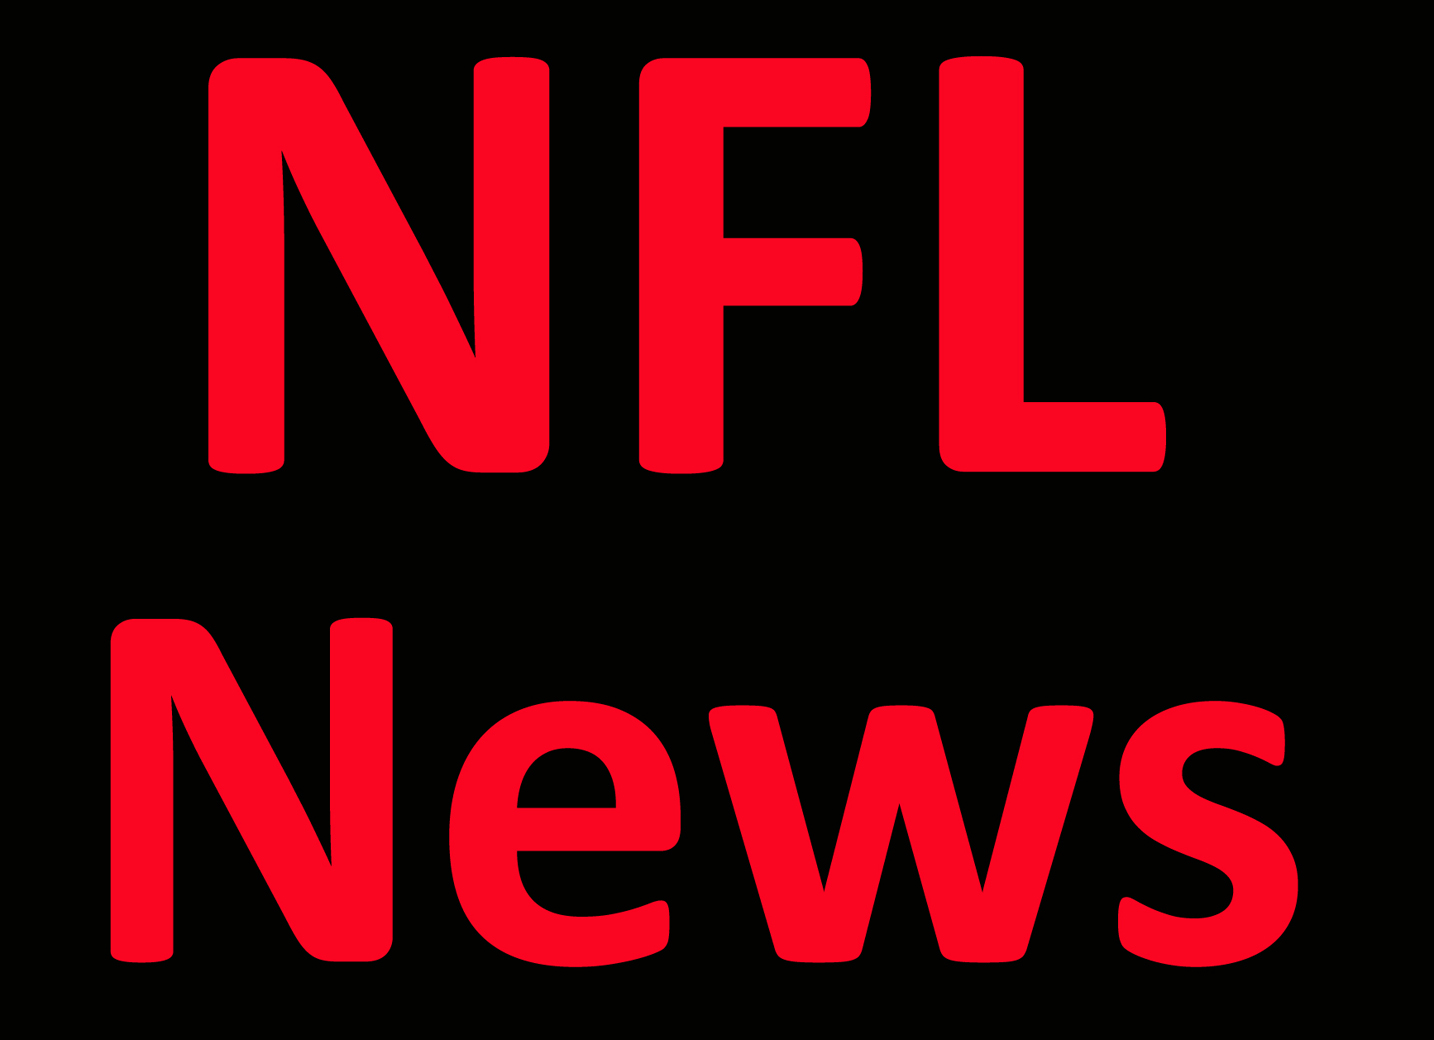 NFL News: NFL Futures: Betting tips for 2022 Super Bowl and conference odds Per Report